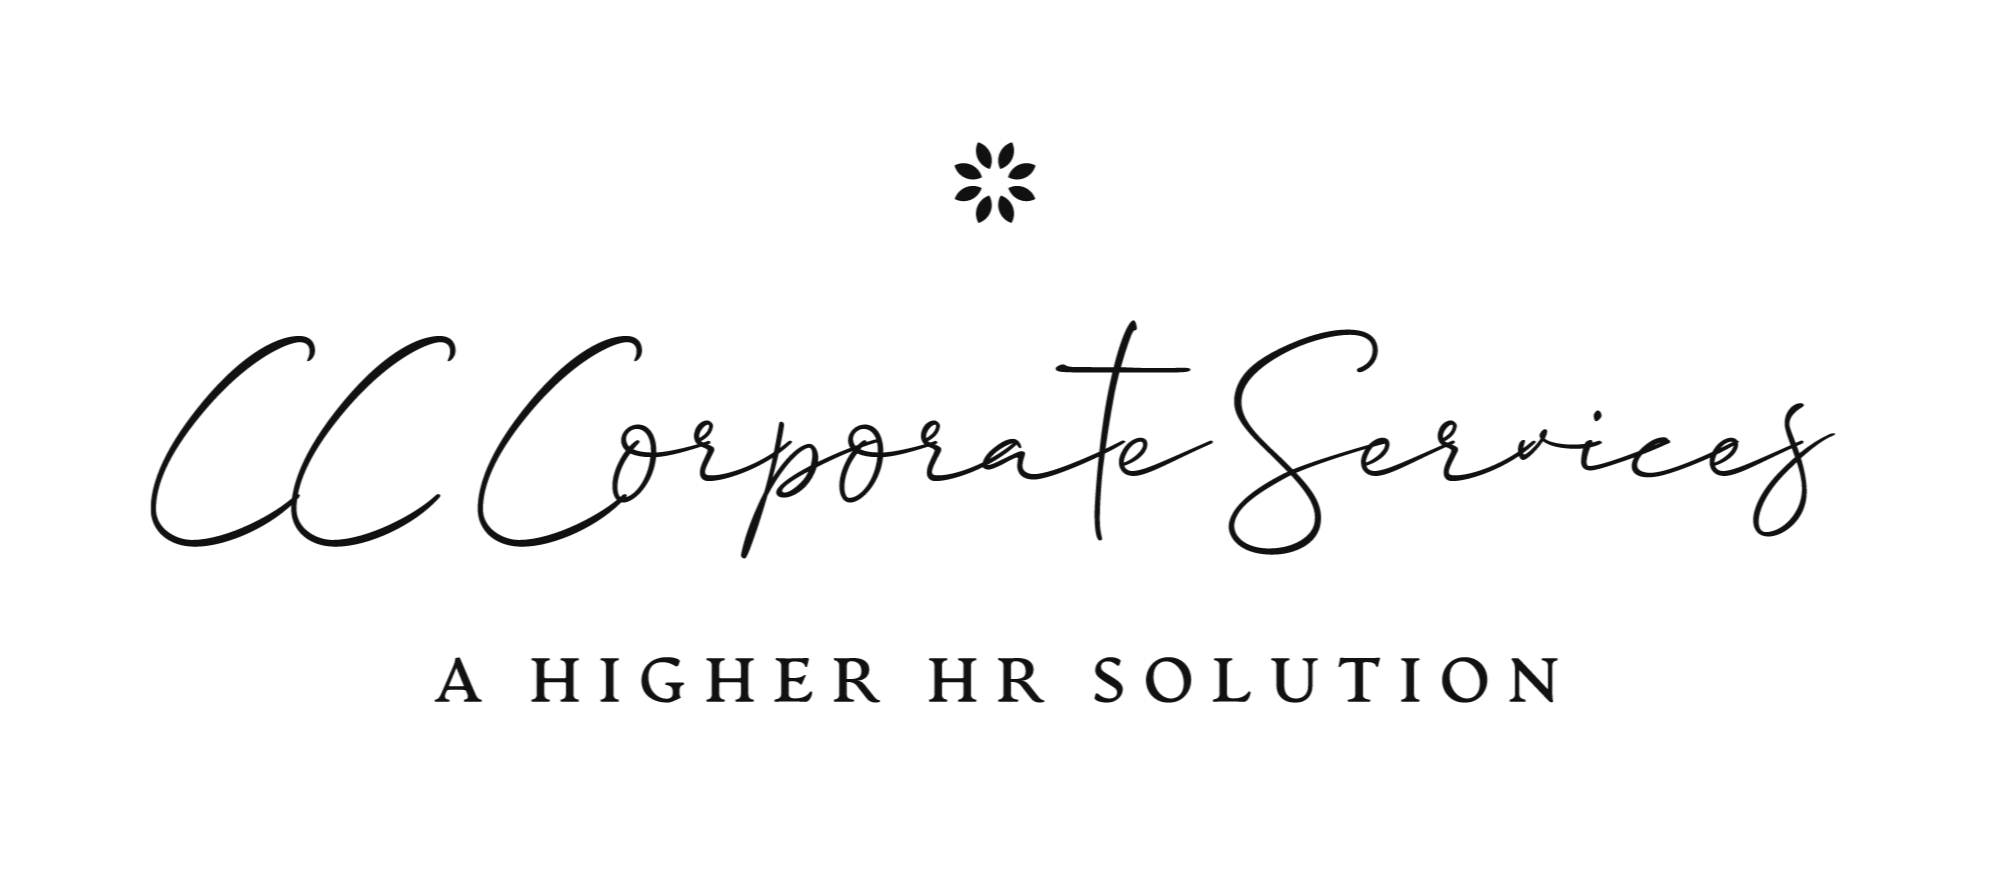 CC Corporate Services Banner